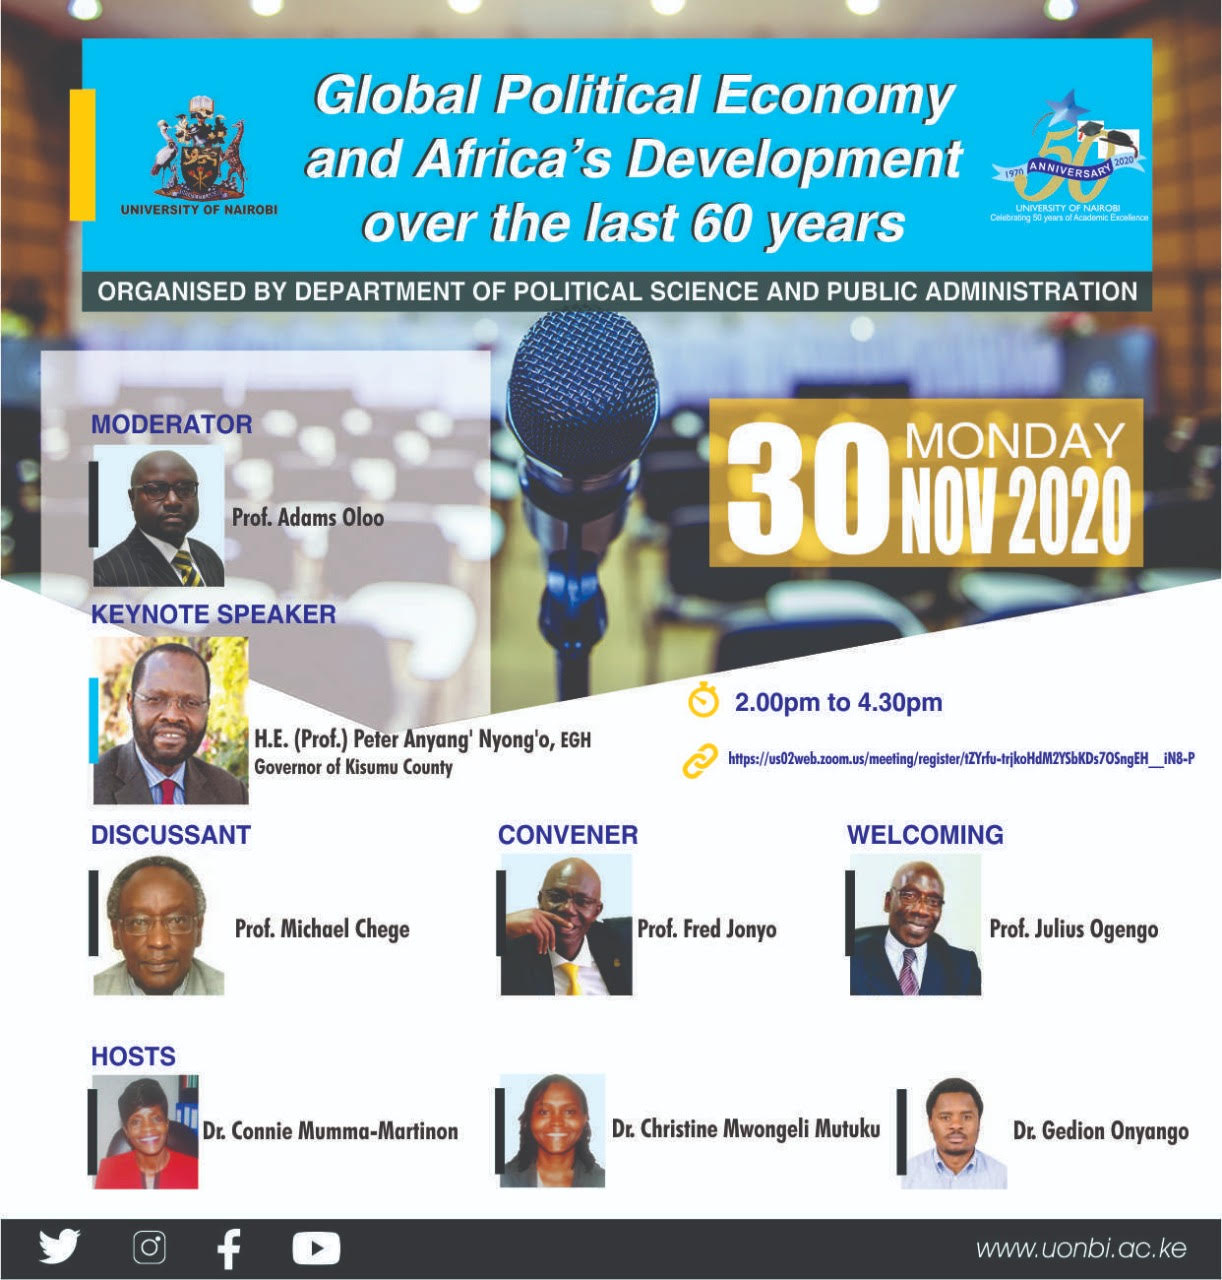 The Global Political Economy and Africa’s Development over the Last 60 Years